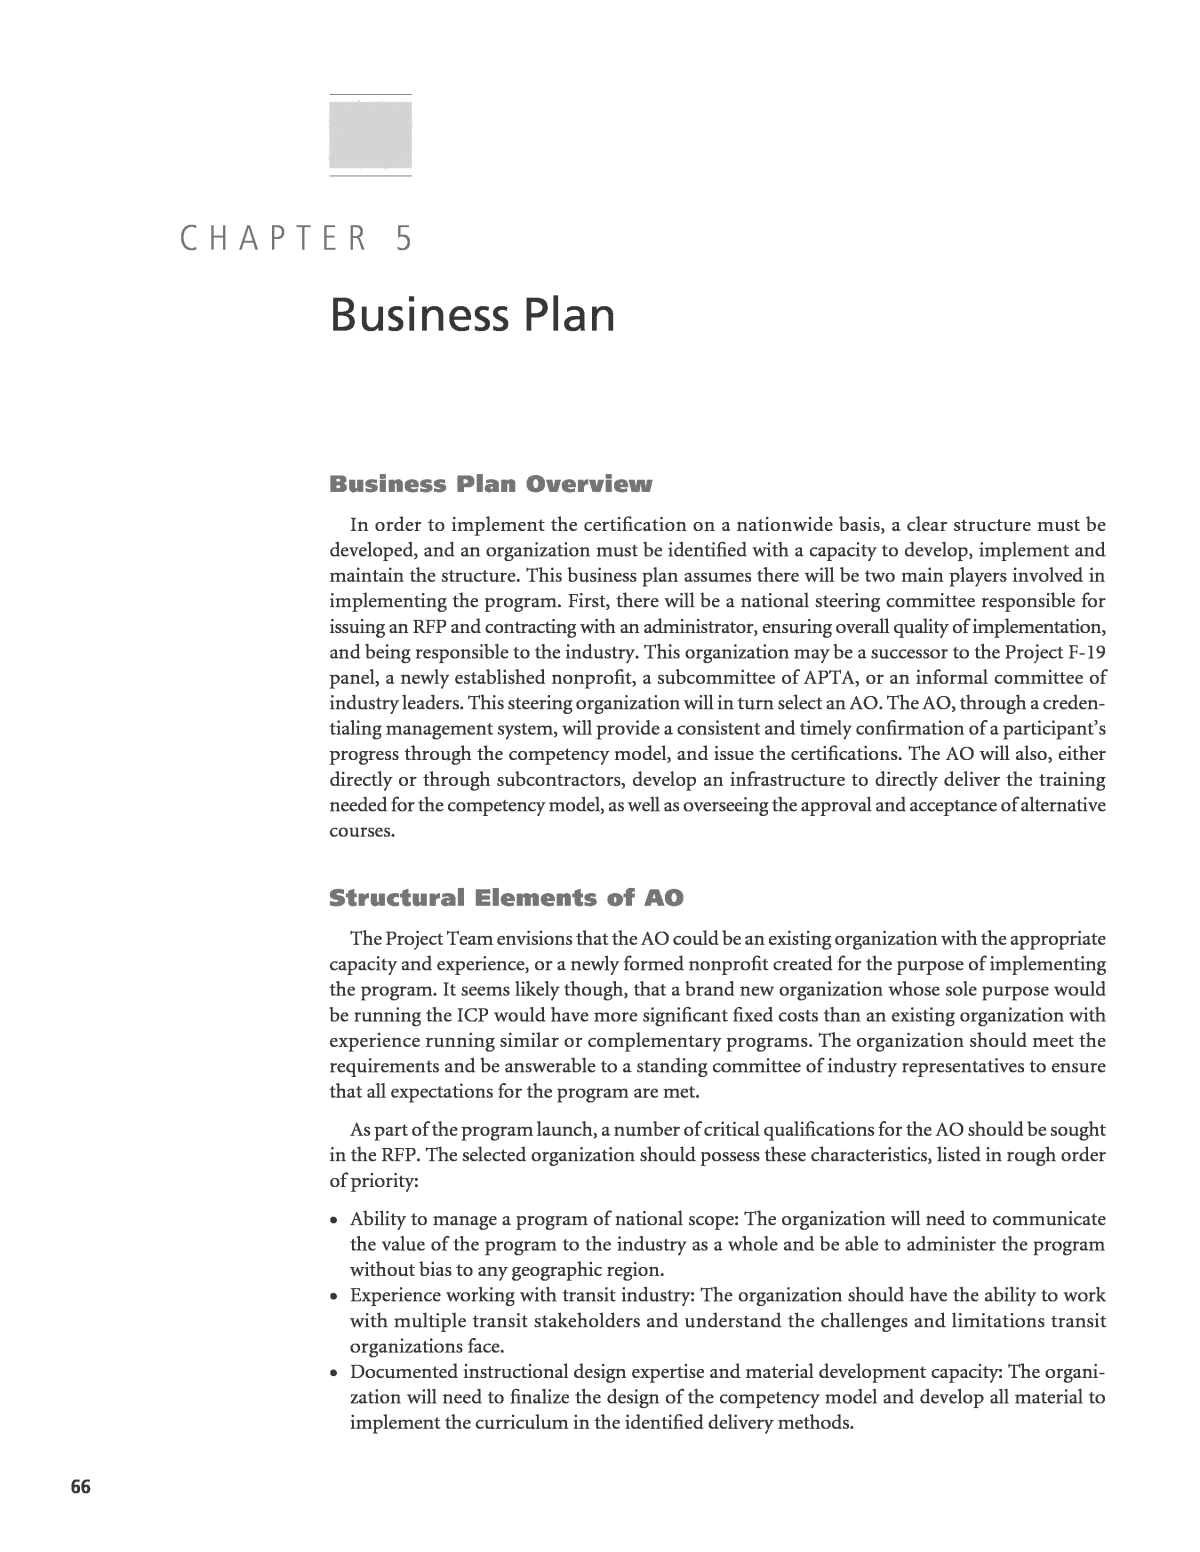 business plan chapter 5